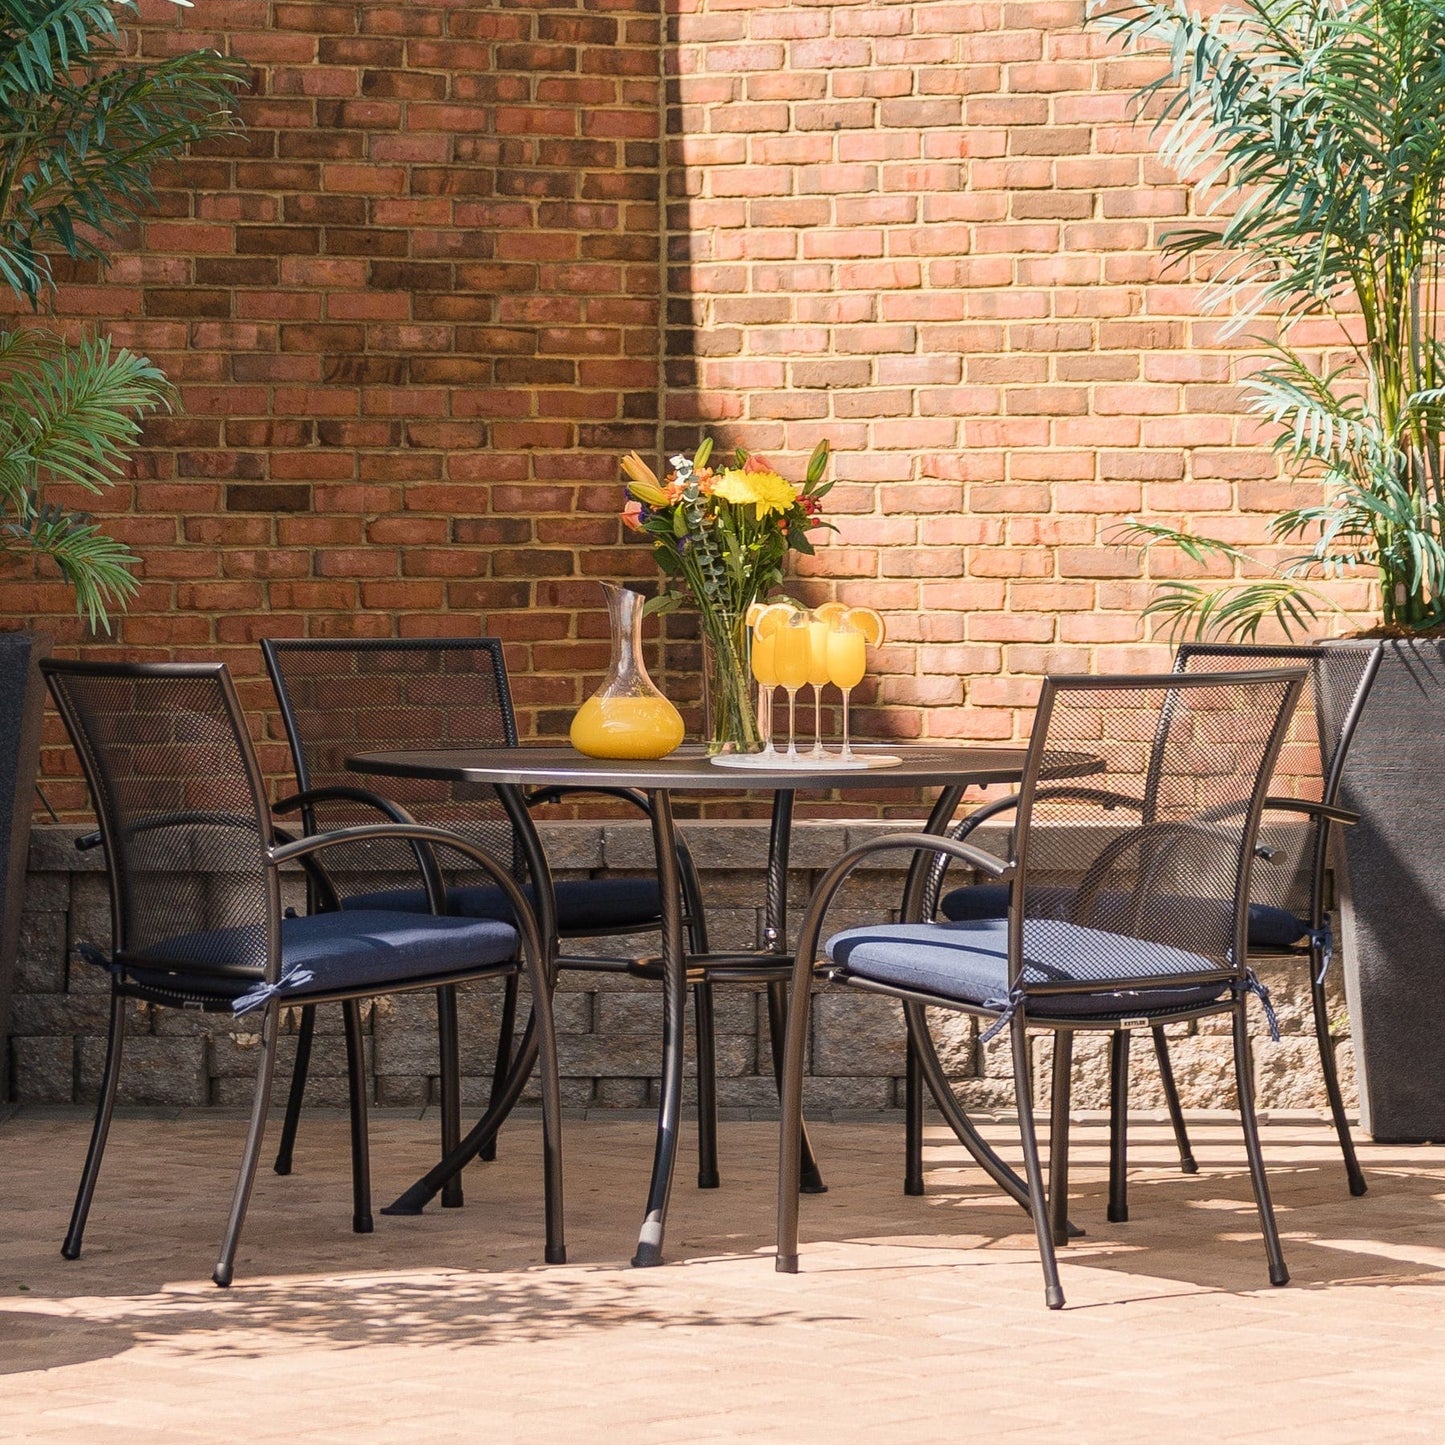 Pilano 5-PIece Wrought Iron set shown here with cushions